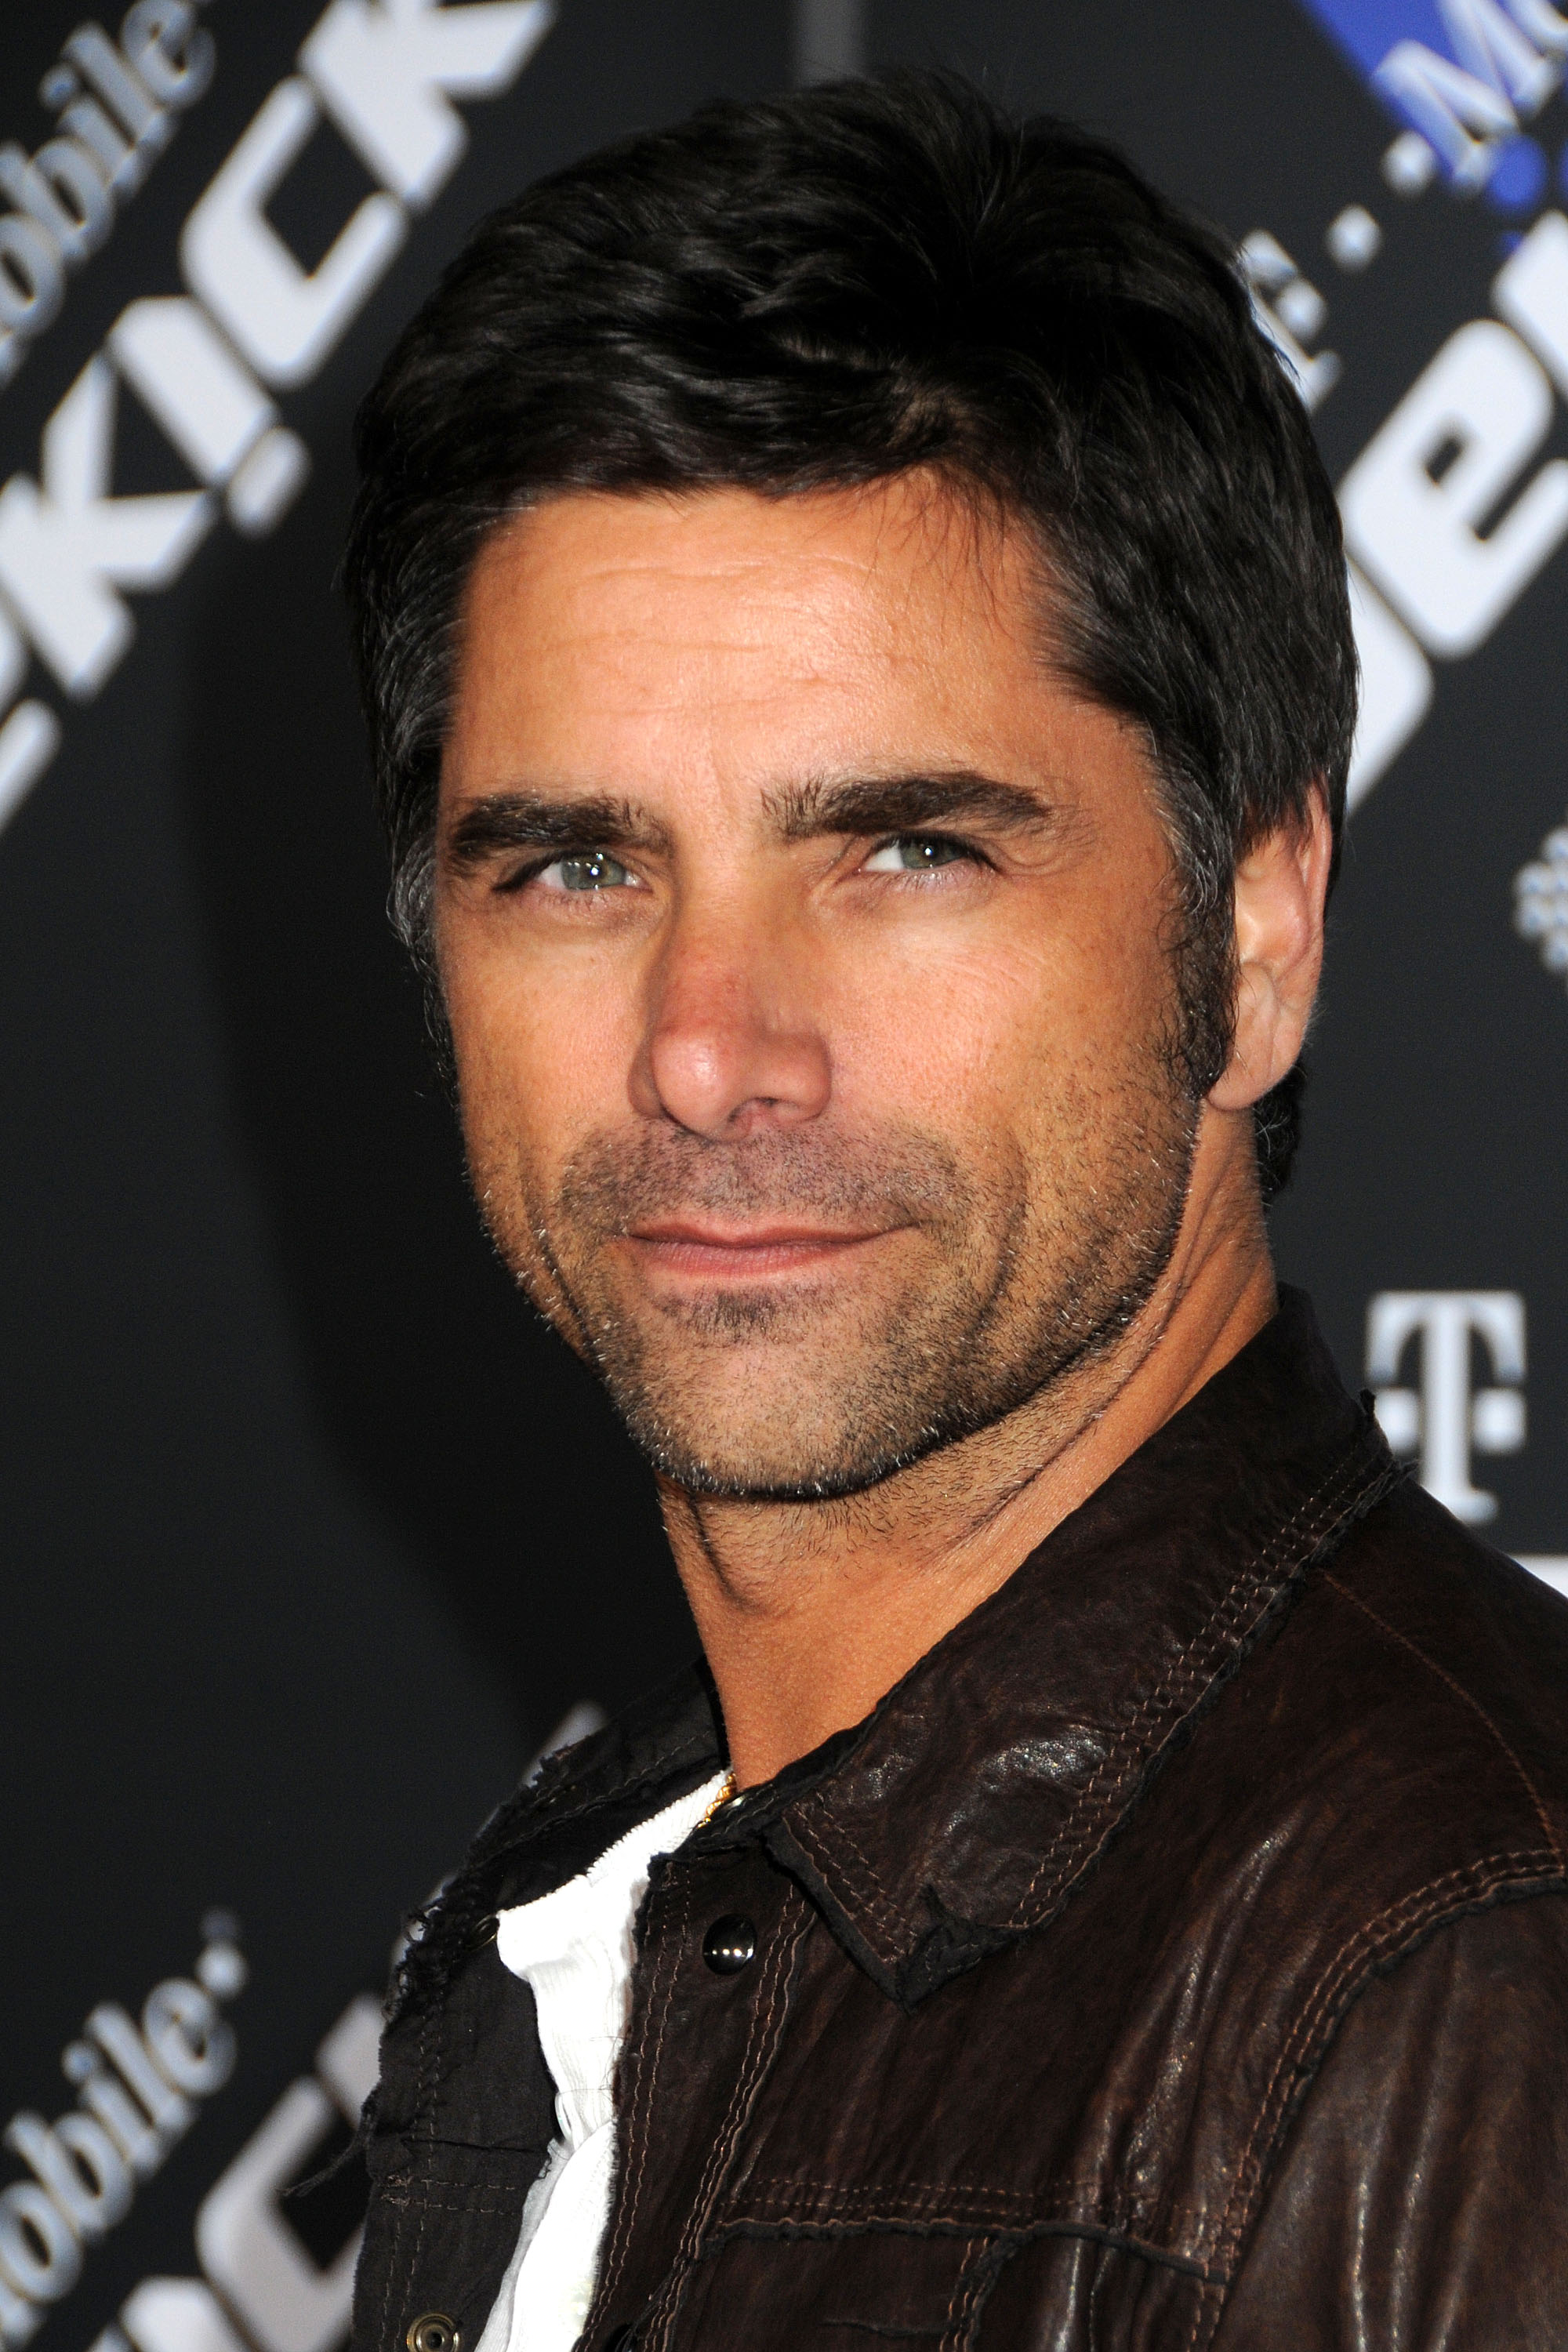 What do you ladies think of the way John Stamos looks? - GirlsAskGuys